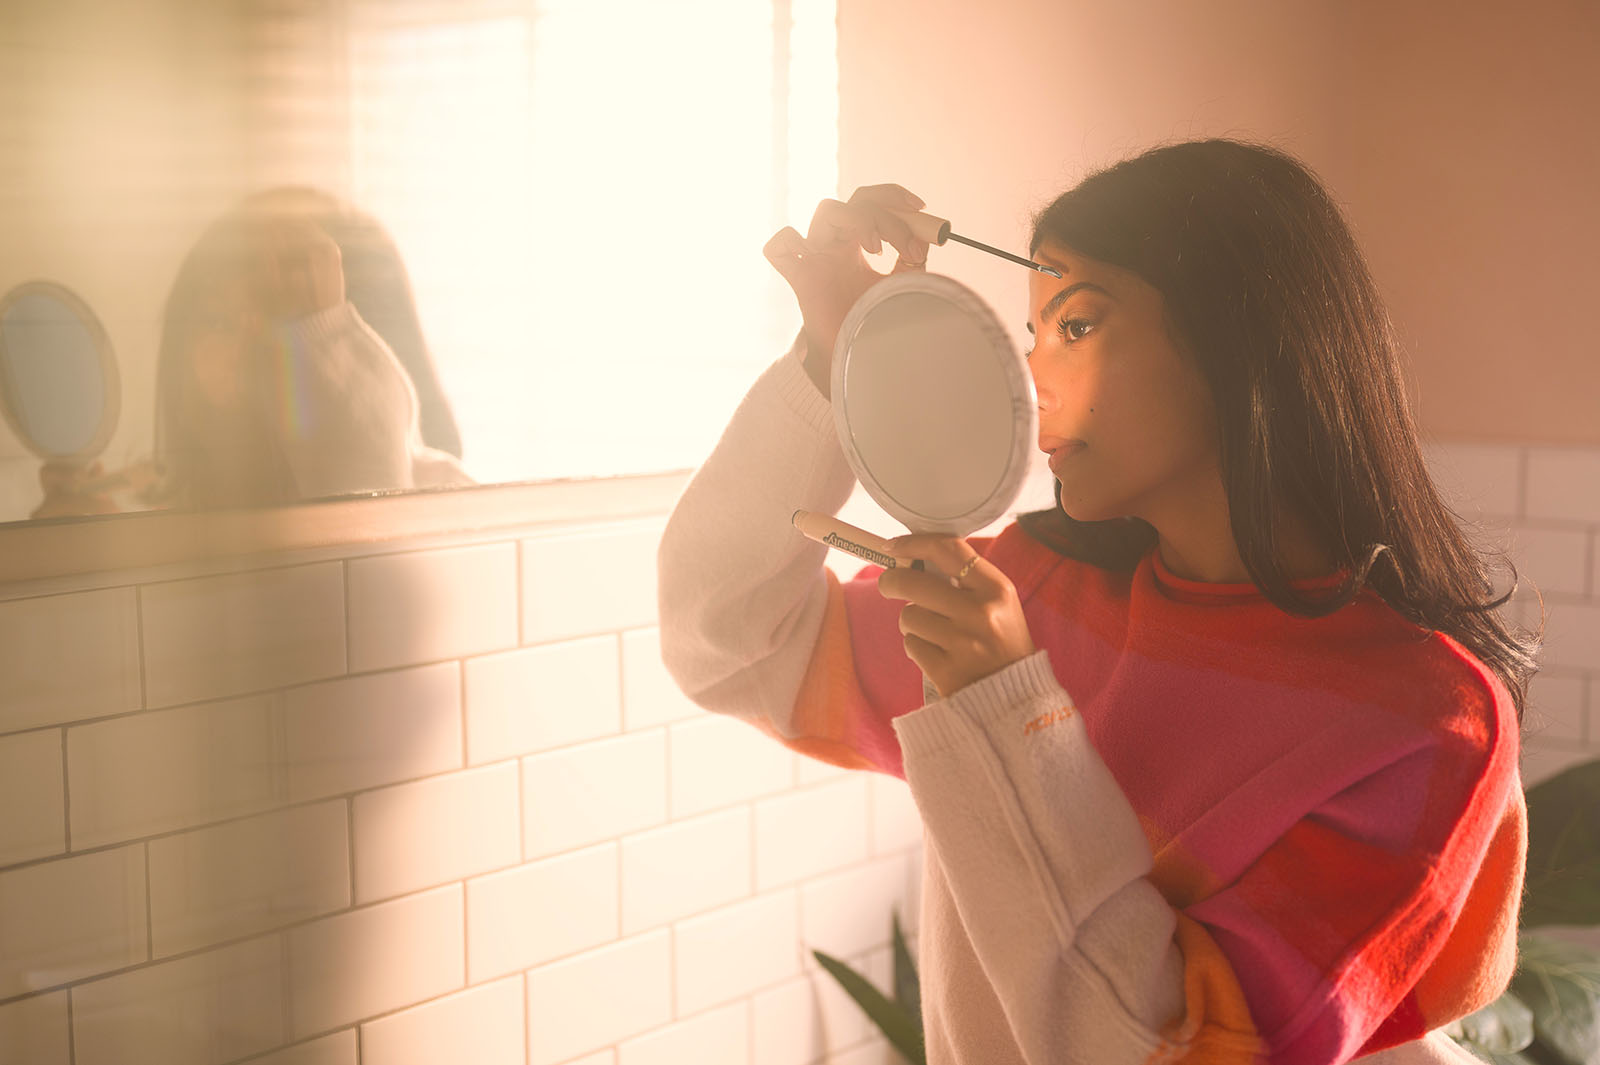 A woman fixes up her makeup with a handheld mirror in a bathroom.